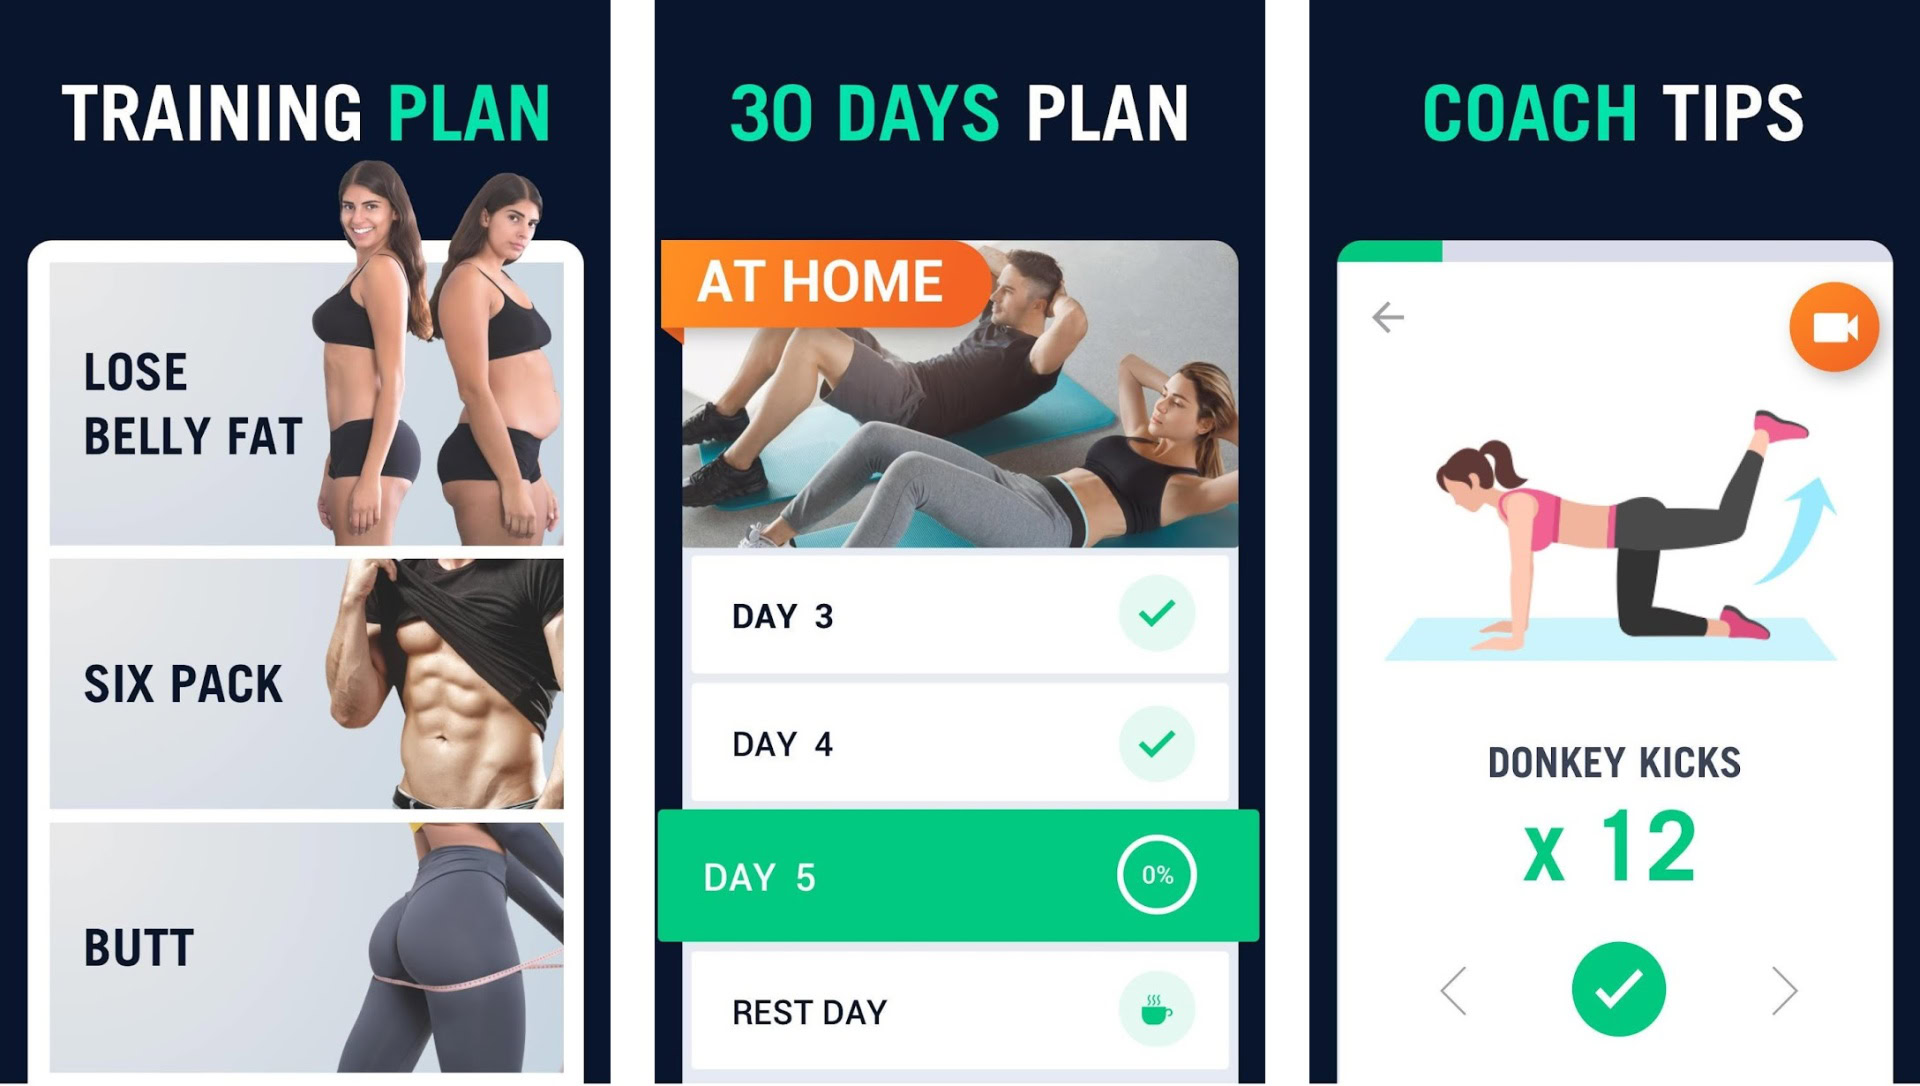 Best Workout Apps For Strength Training Kayaworkout.co